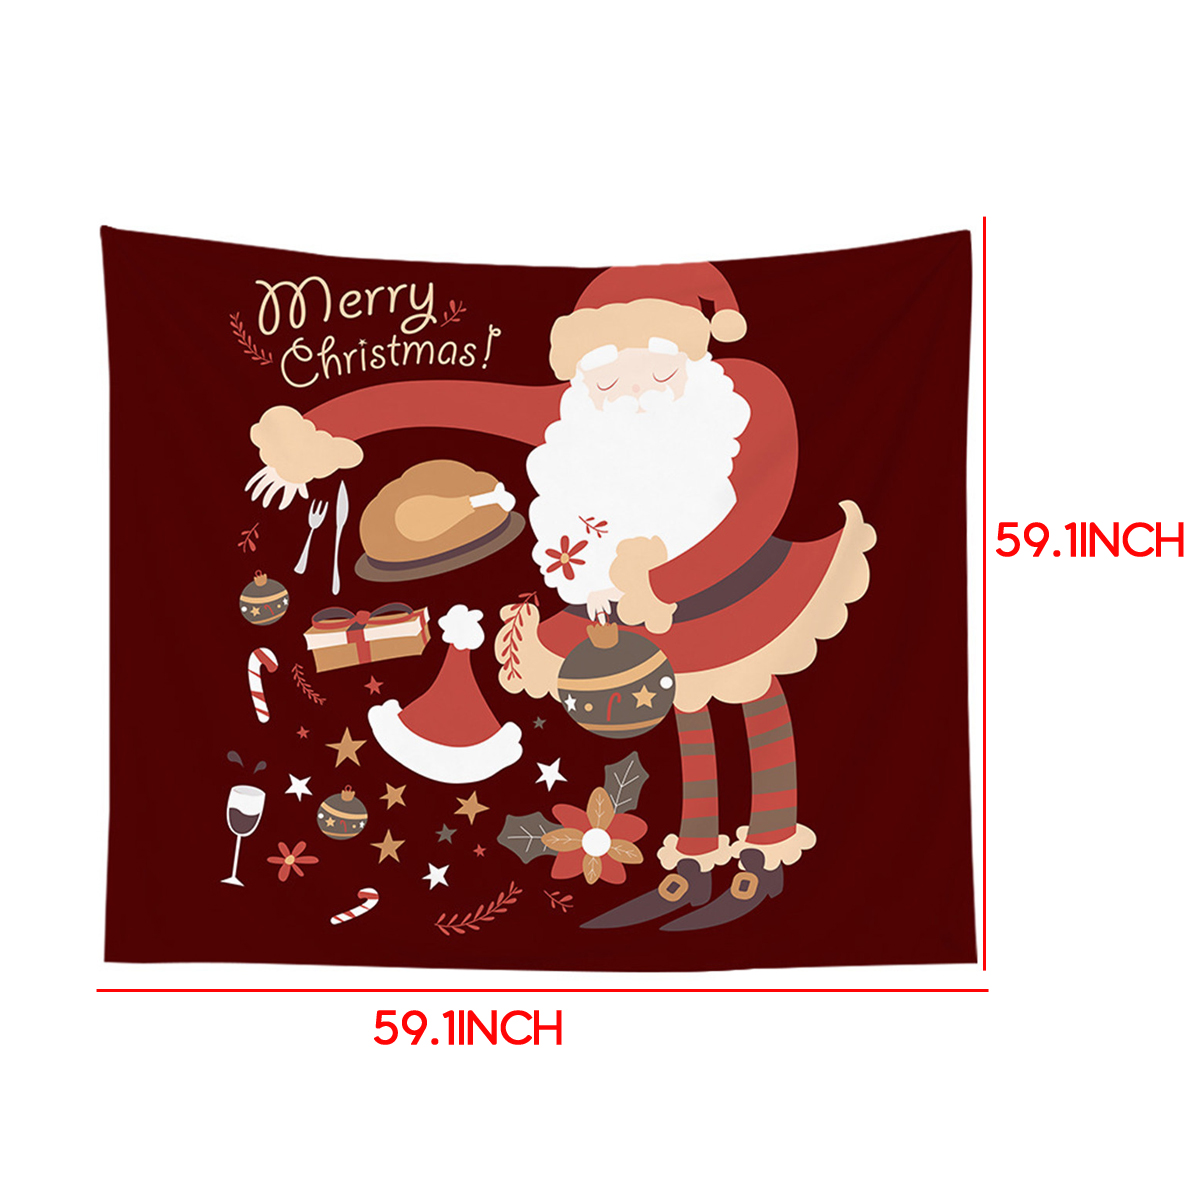 Christmas-Hanging-Cloth-Custom-Red-Santa-Claus-Bedside-Photography-Background-Cloth-Wall-Bedside-Dec-1749899-8